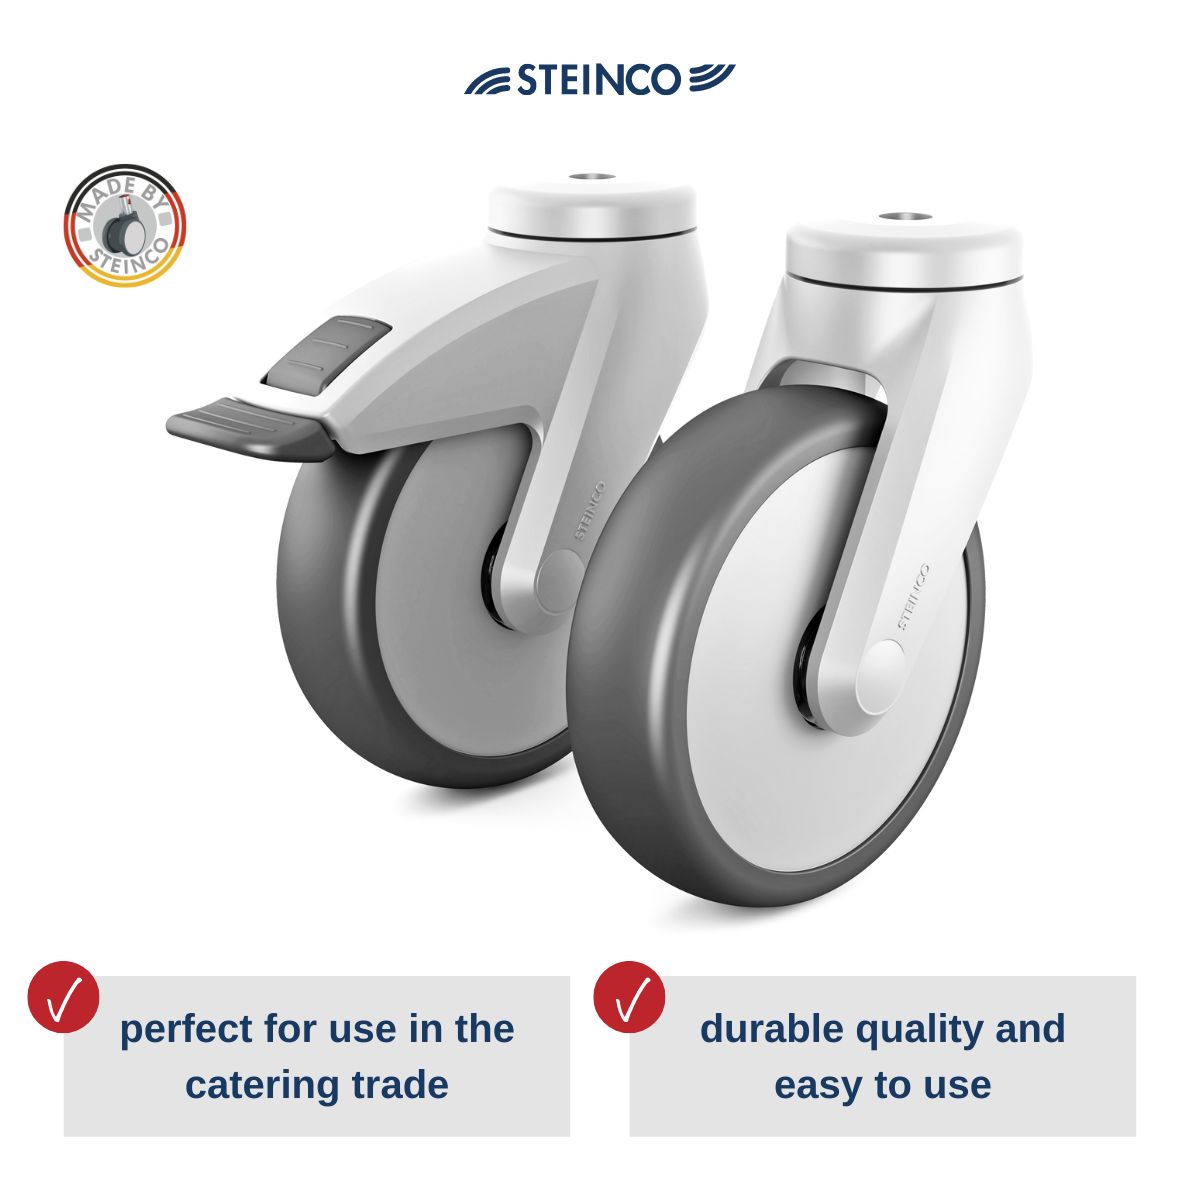 Steering castors & wheels made of plastic & stainless steel - specially designed for serving trolleys, shelf trolleys, kitchen trolleys, tray trolleys, drink trolleys, platform trolleys & kitchen trolleys.